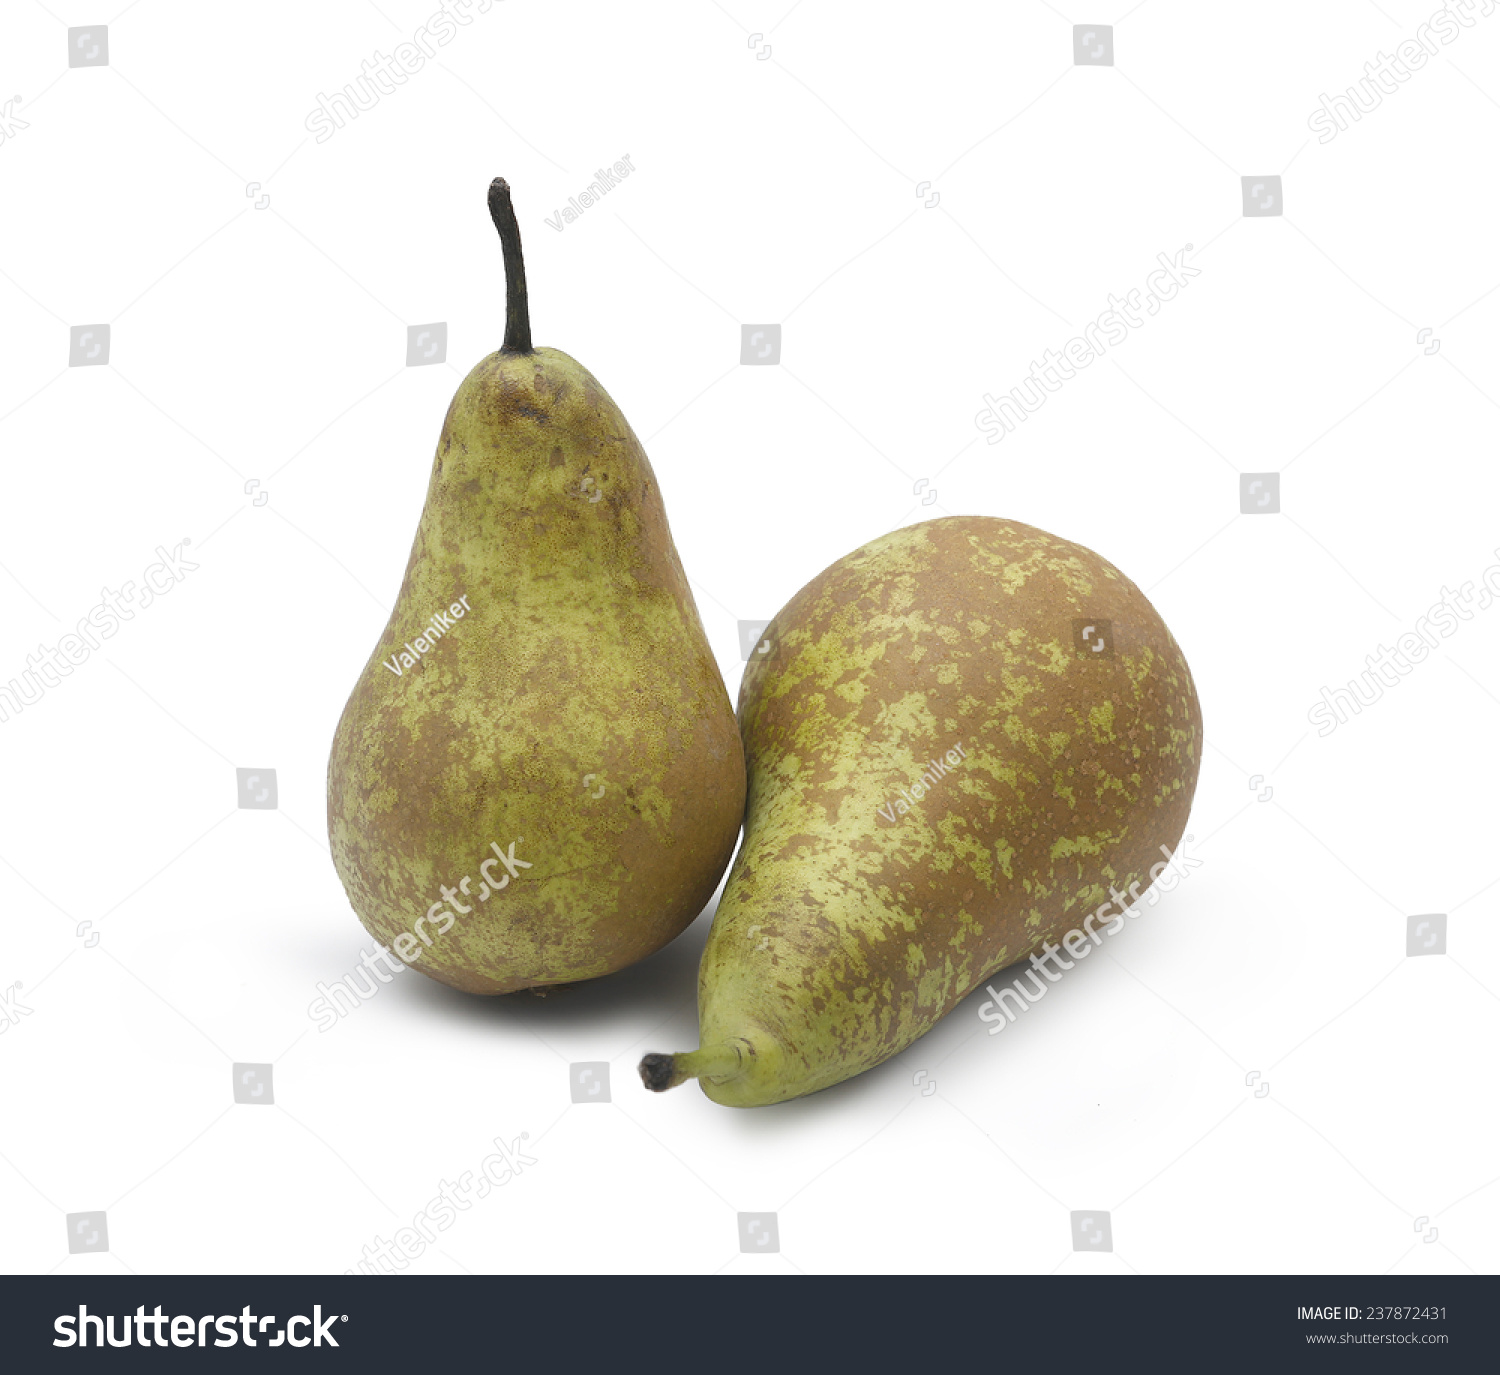 Two Pears Conference On White Background Stock Photo (Royalty Free ...